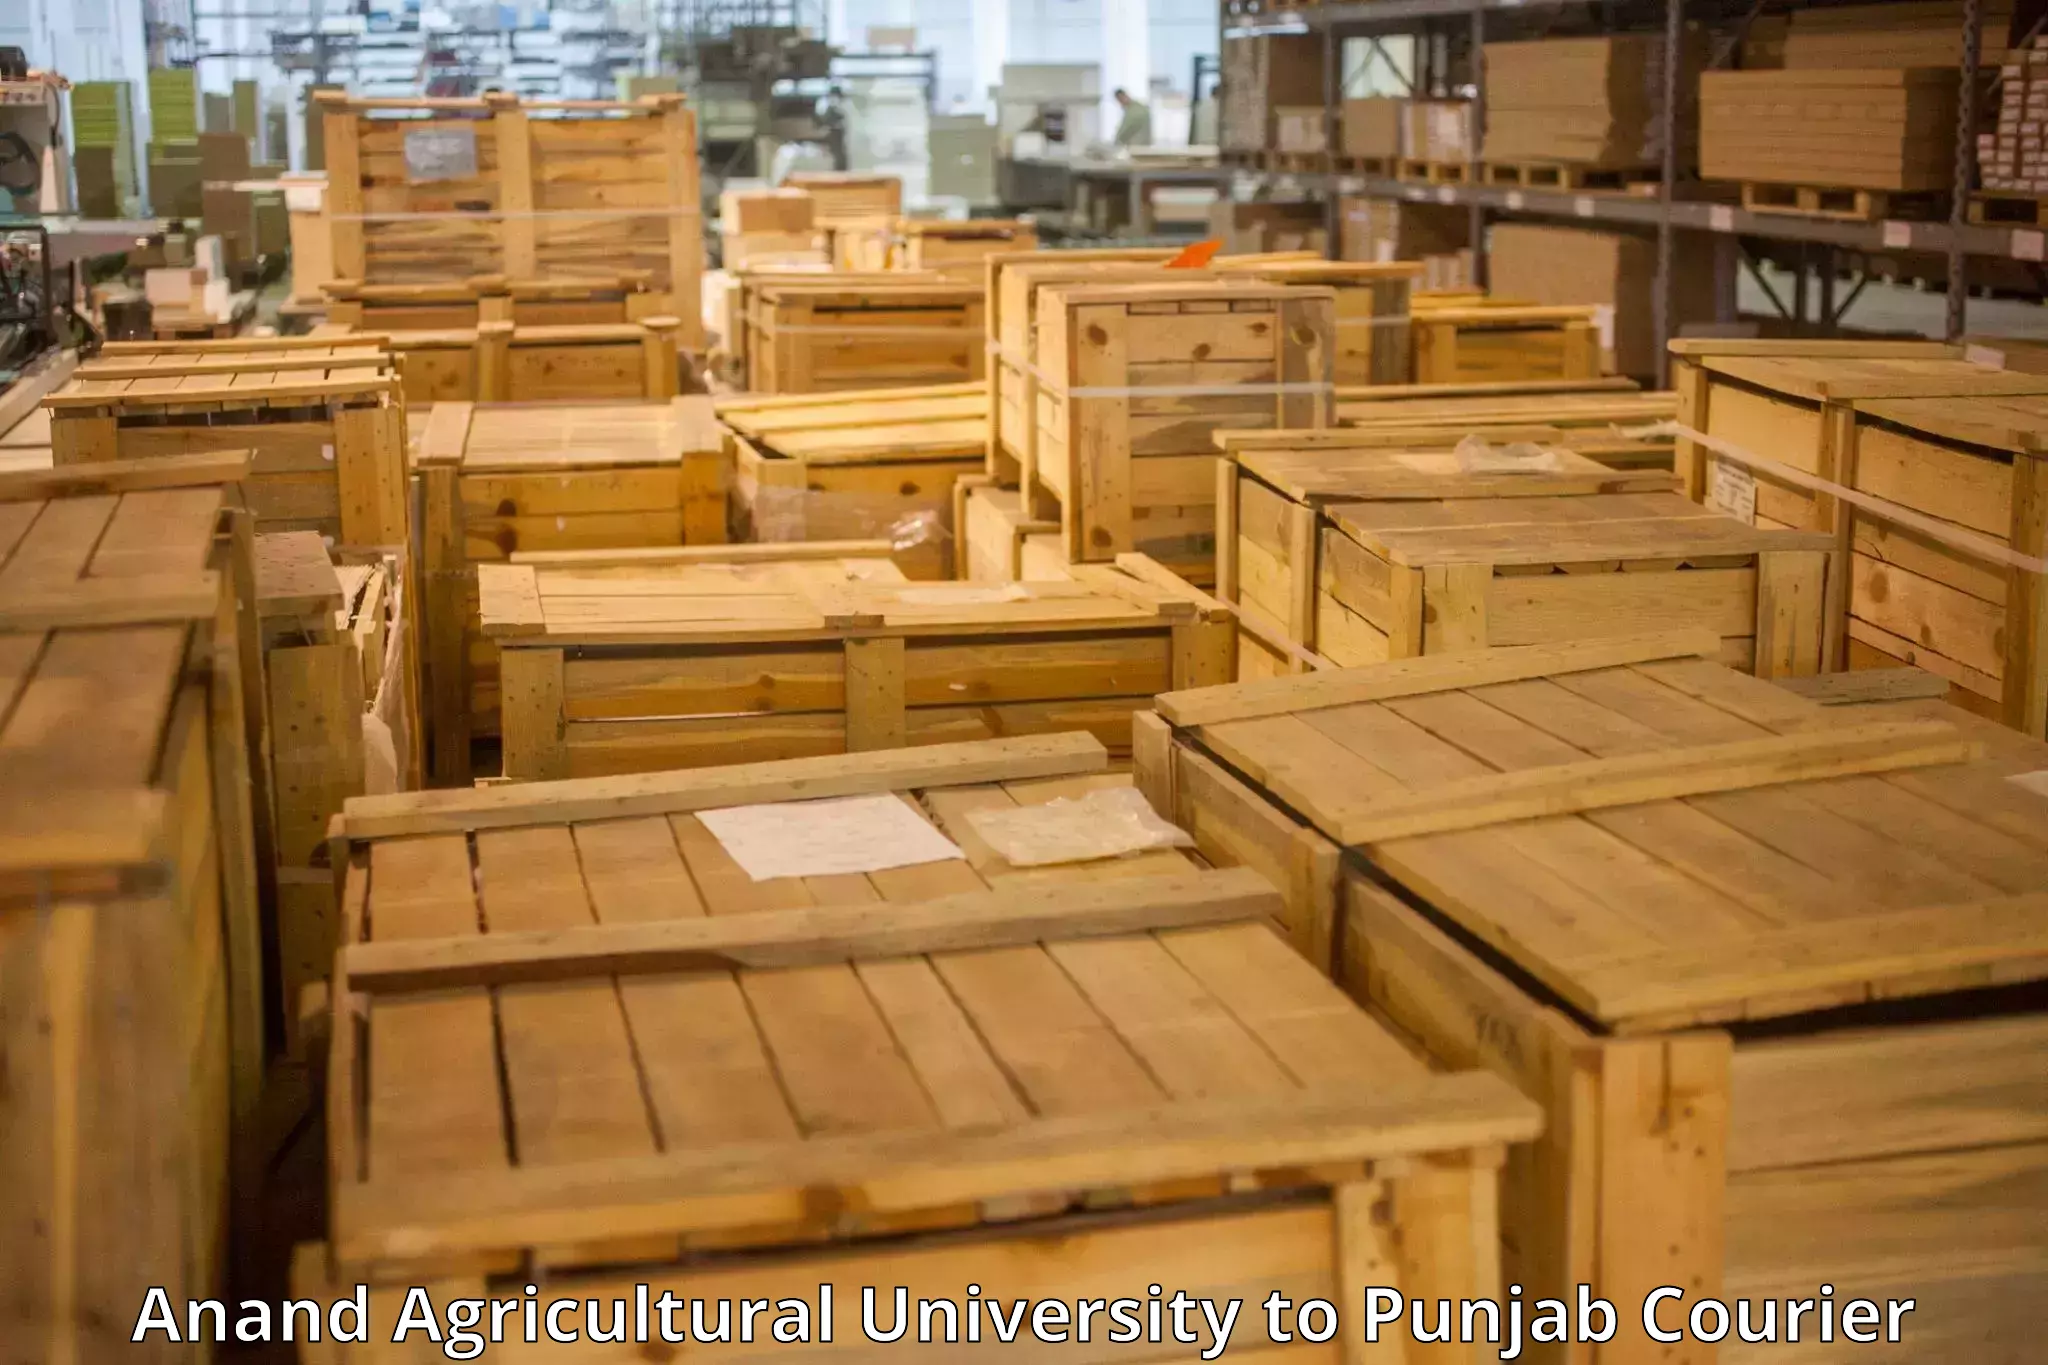 Reliable baggage delivery Anand Agricultural University to Nabha